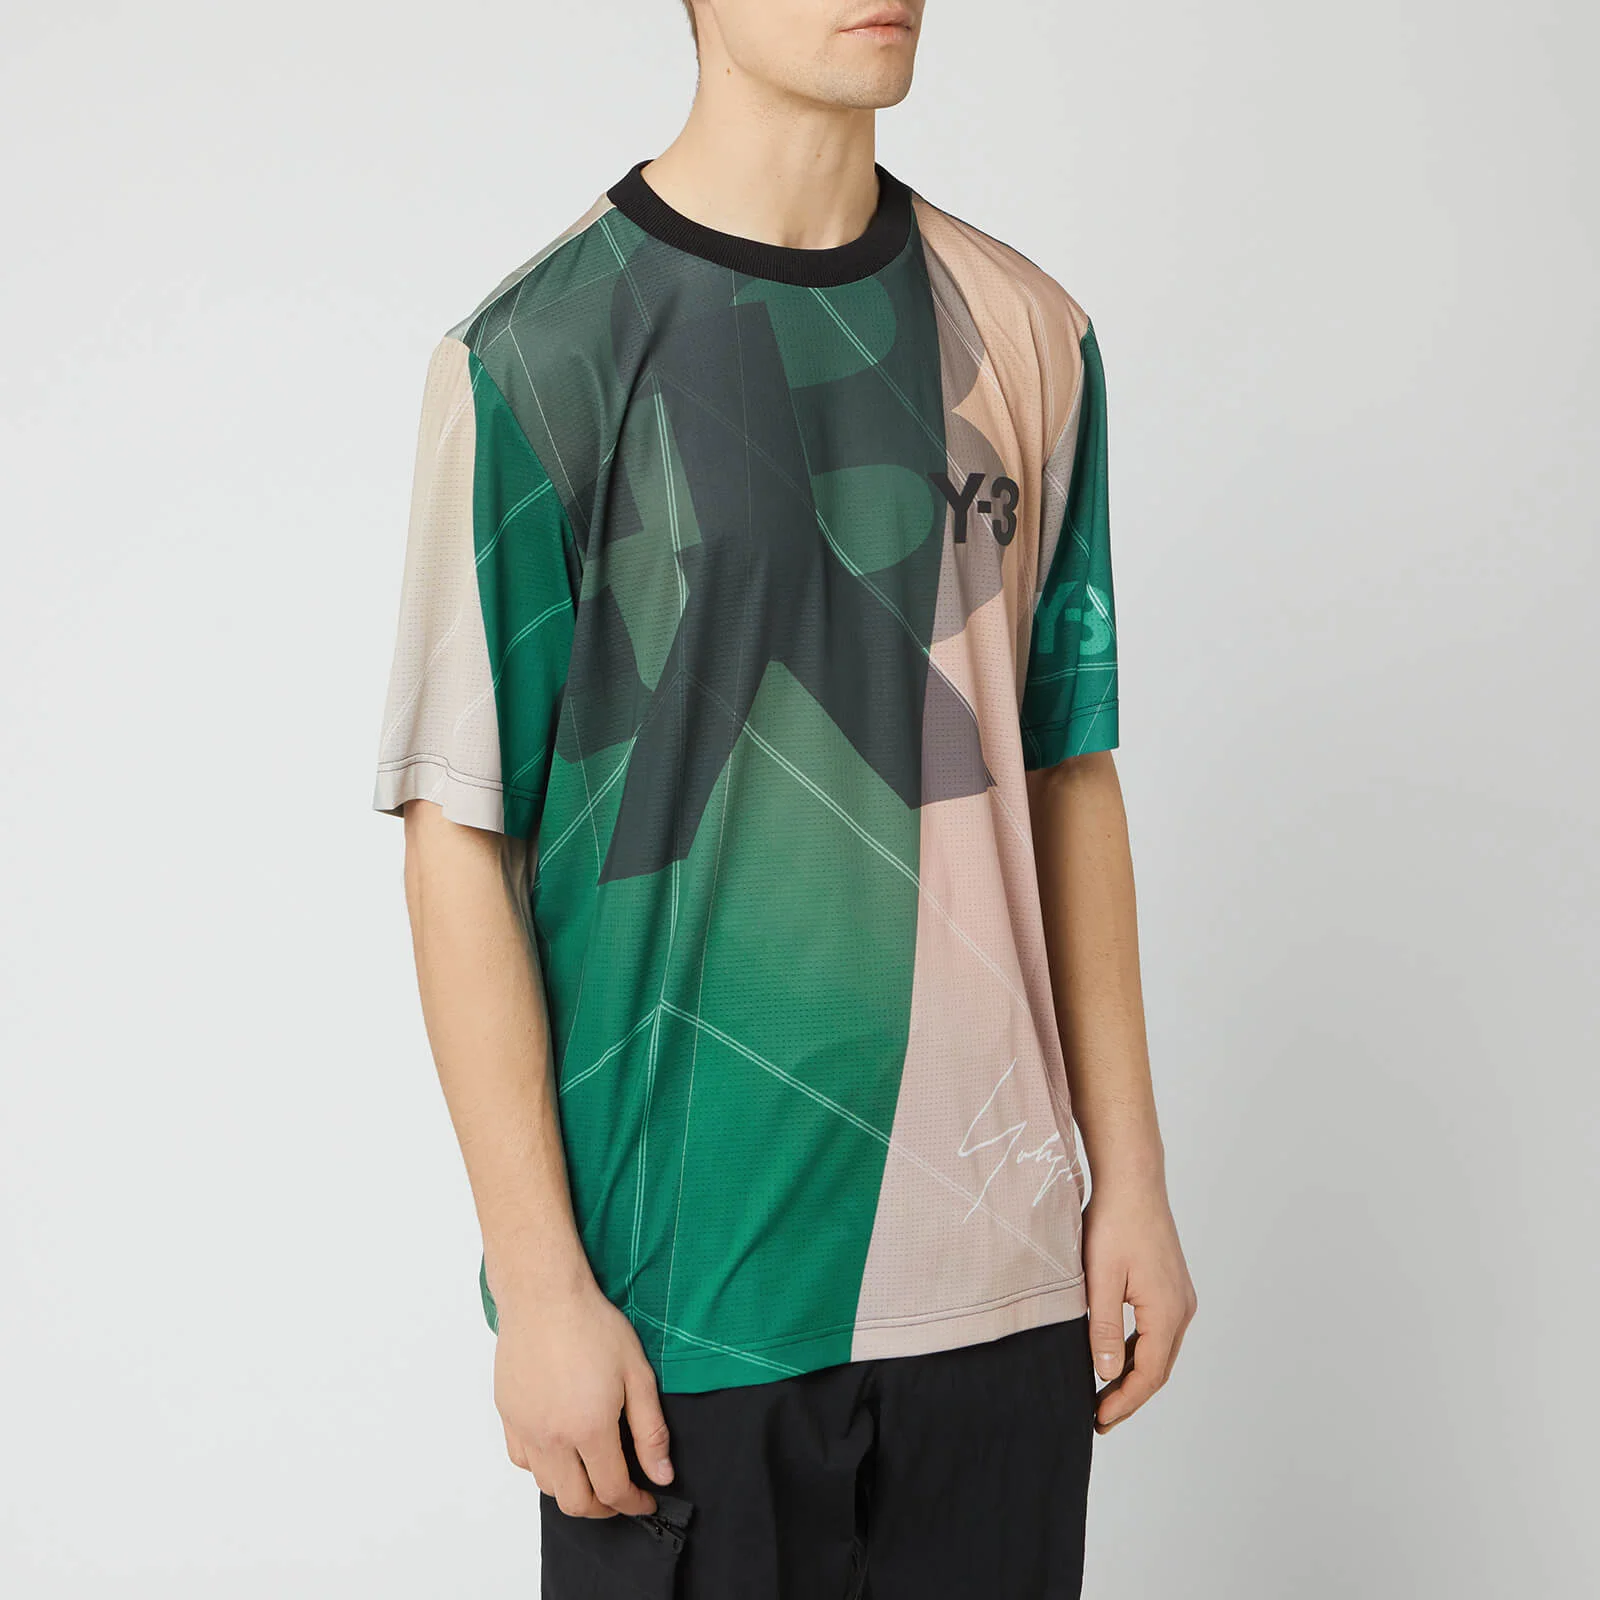 Y-3 Men's All Over Print Football Shirt - Sail Salty Champagne Image 1